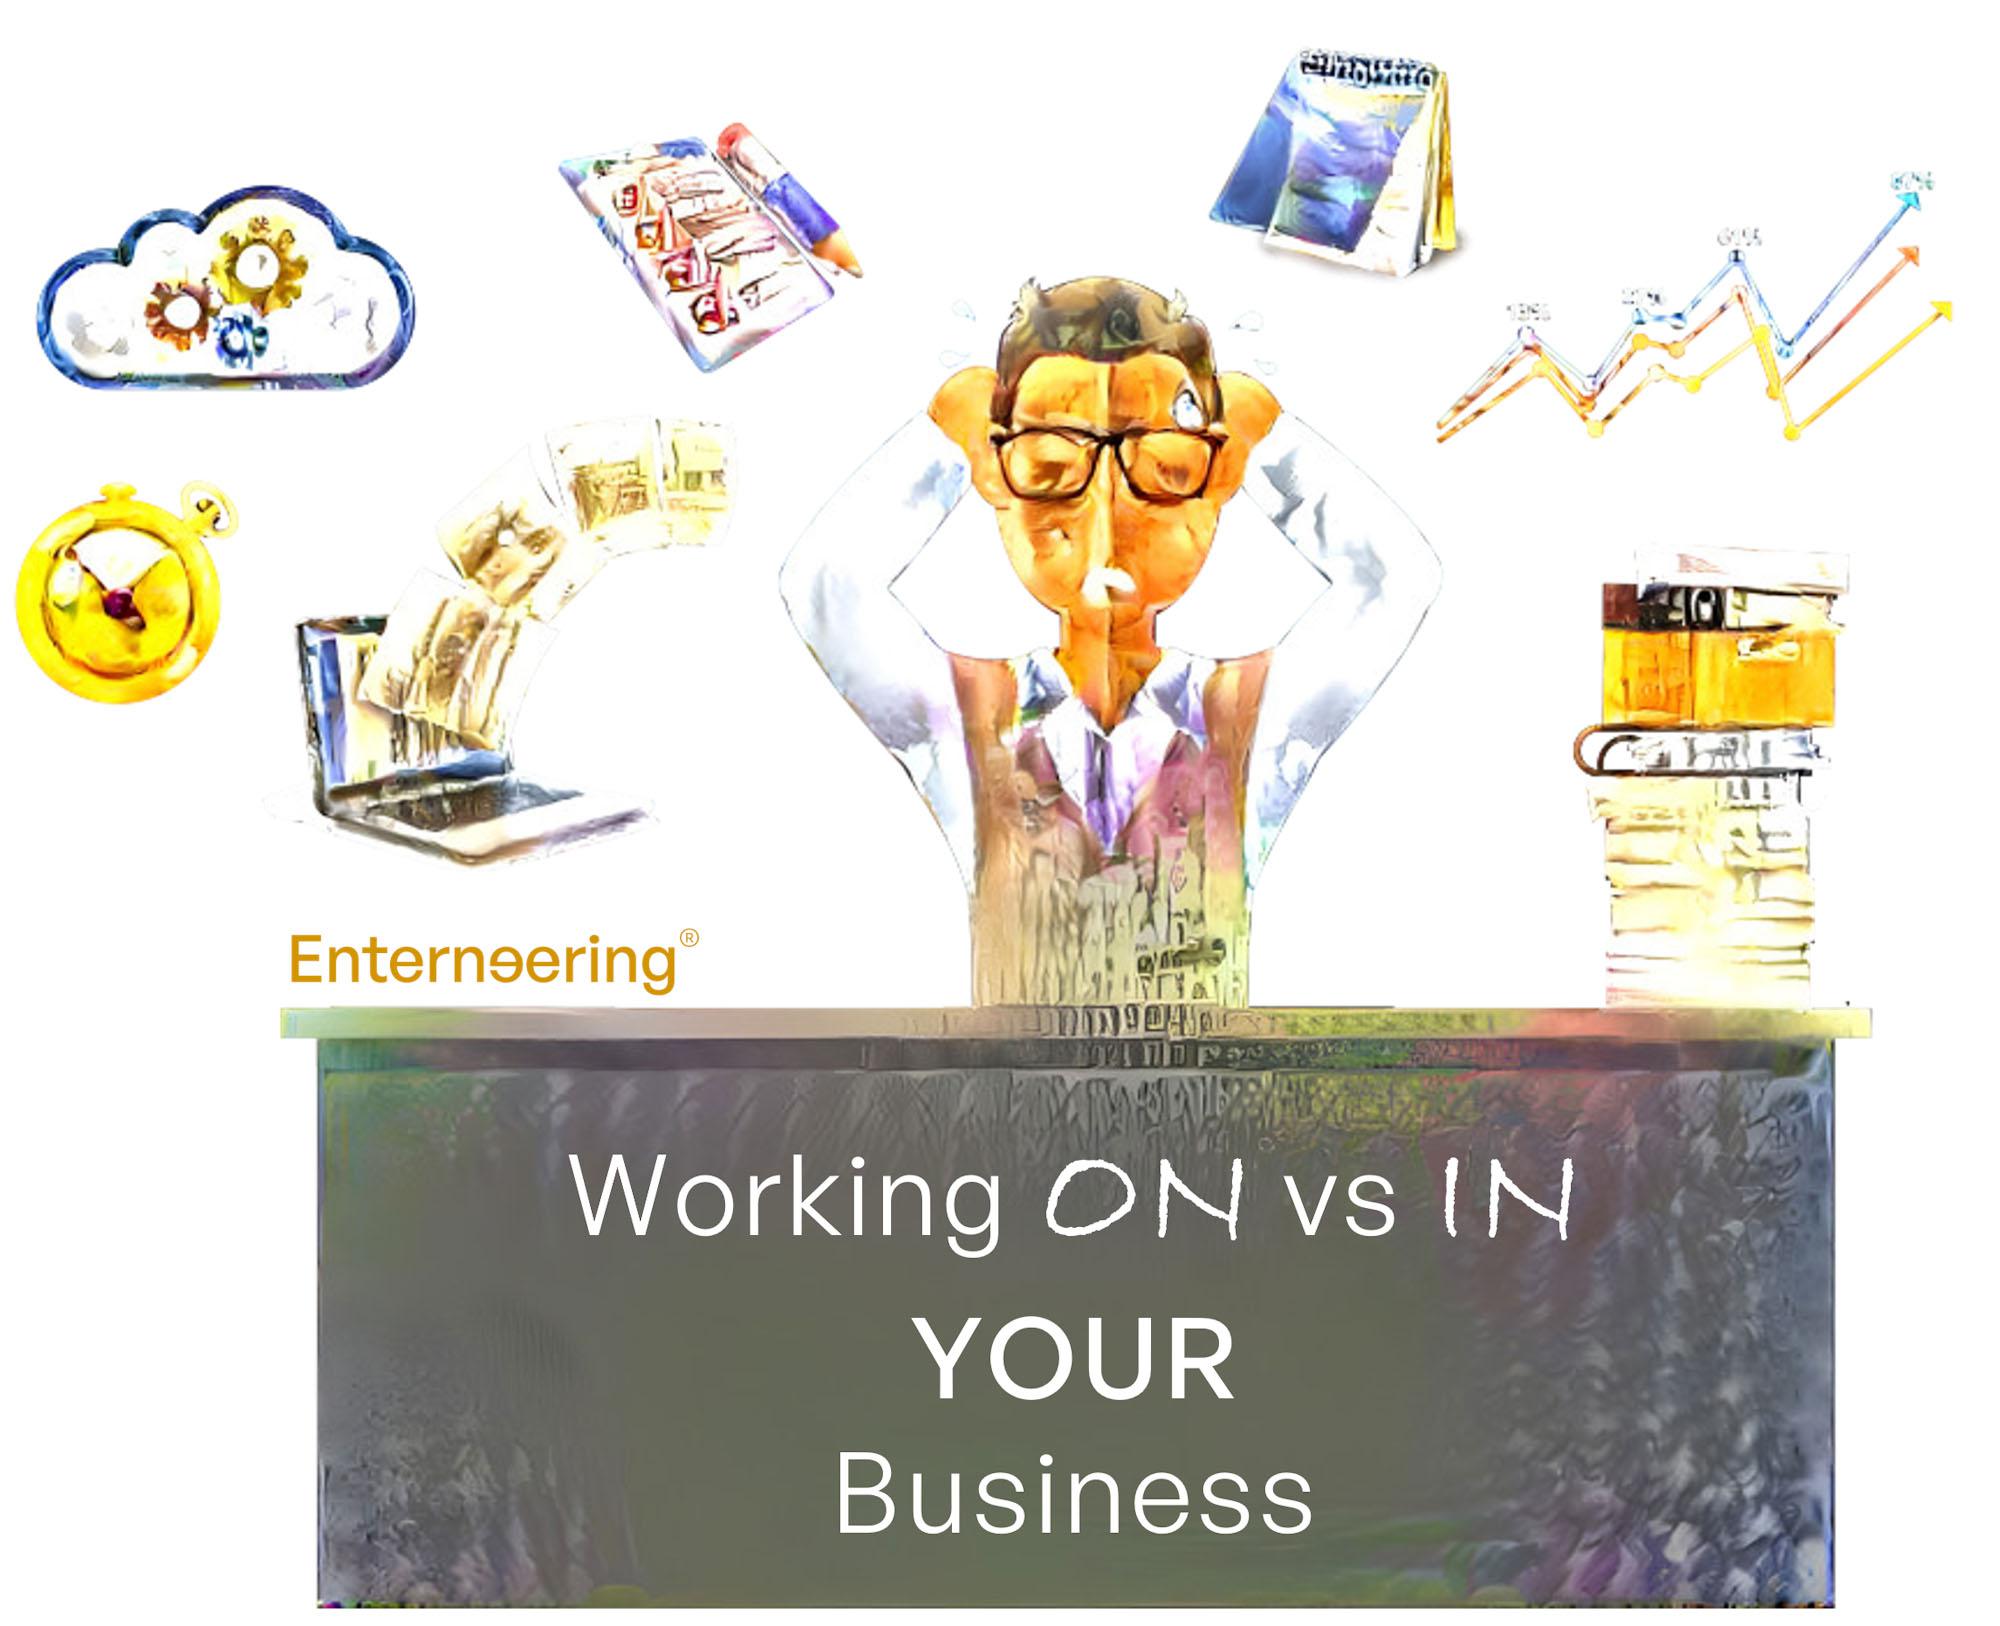 working-ON-versus-IN-your-business_edited